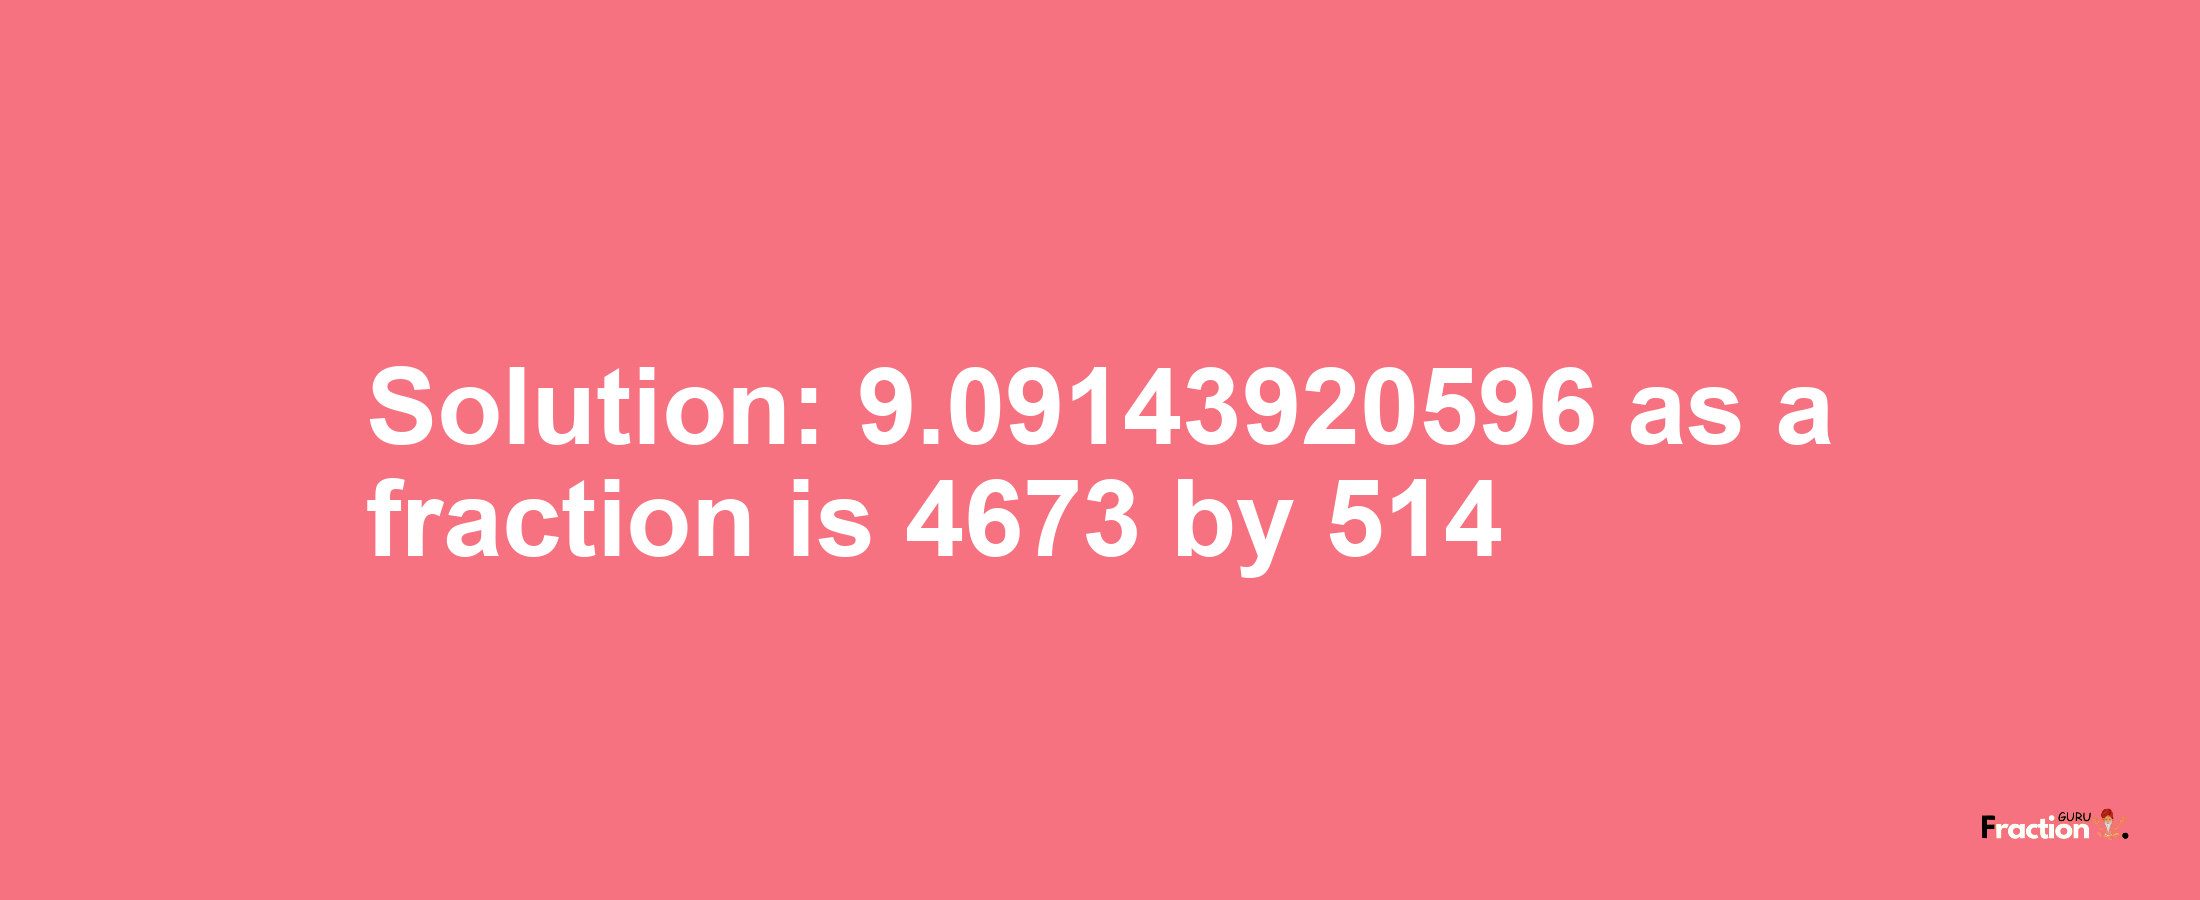 Solution:9.09143920596 as a fraction is 4673/514